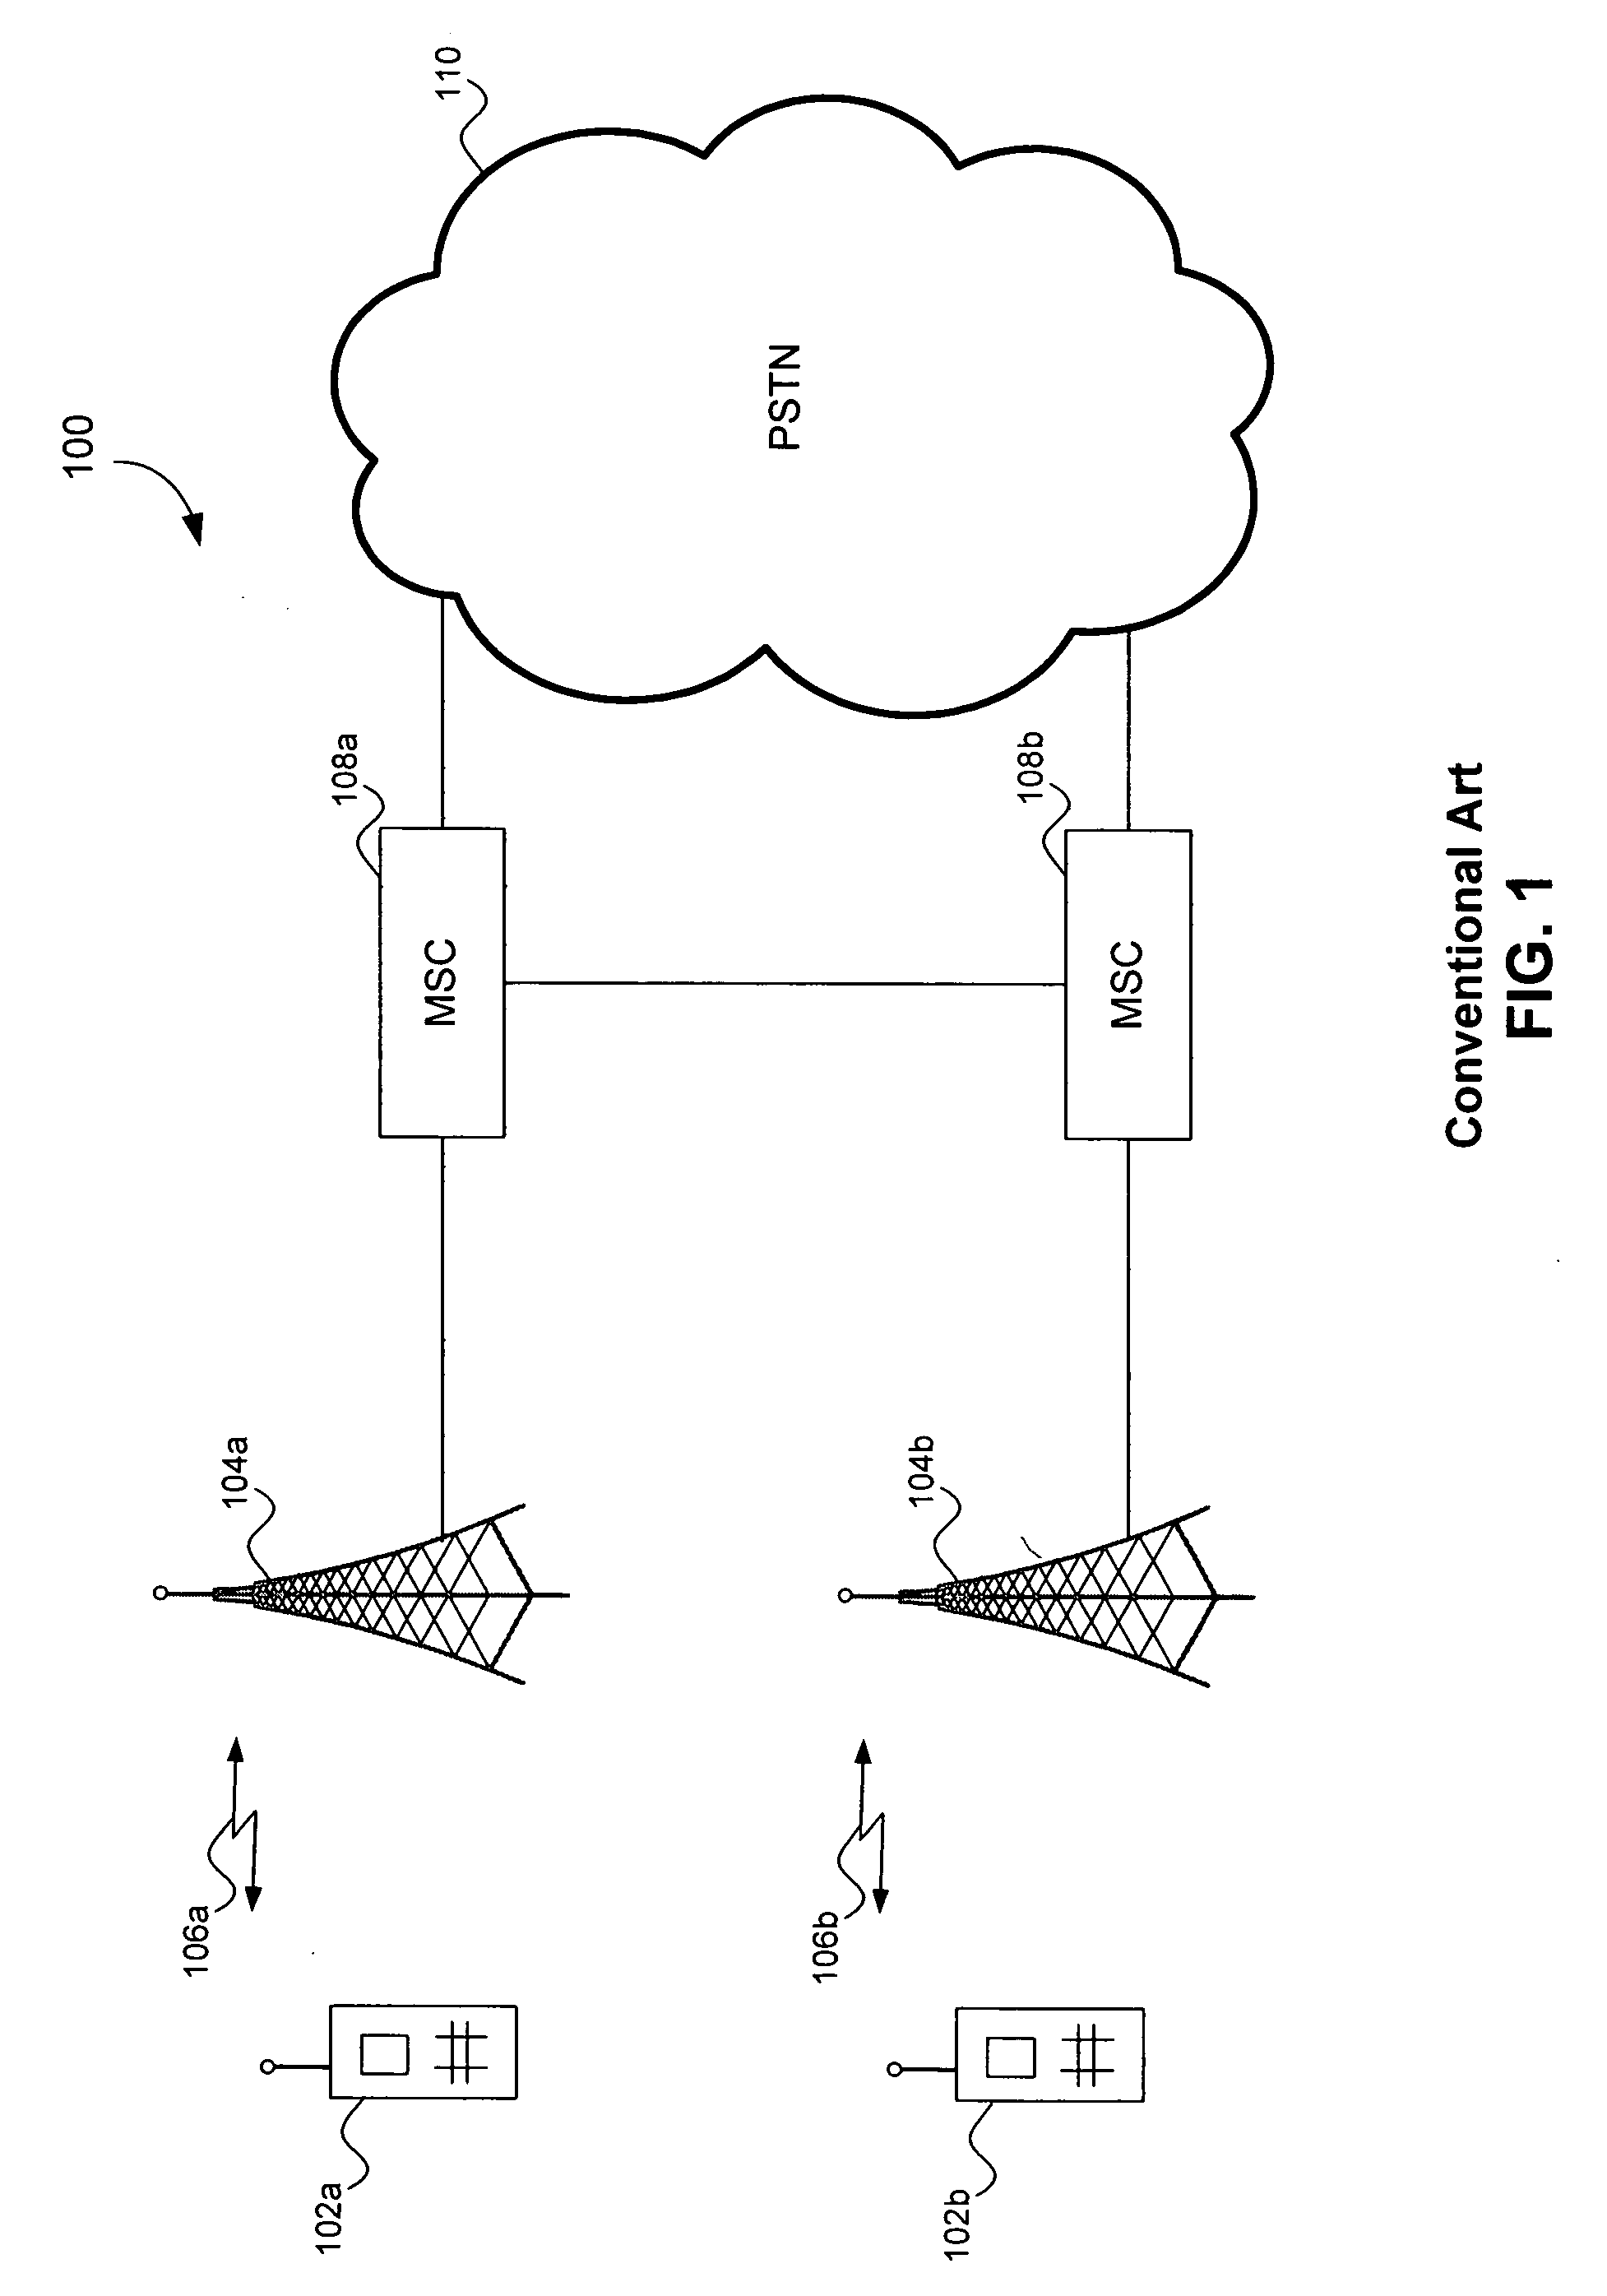 User-selectable music-on-hold for a communications device